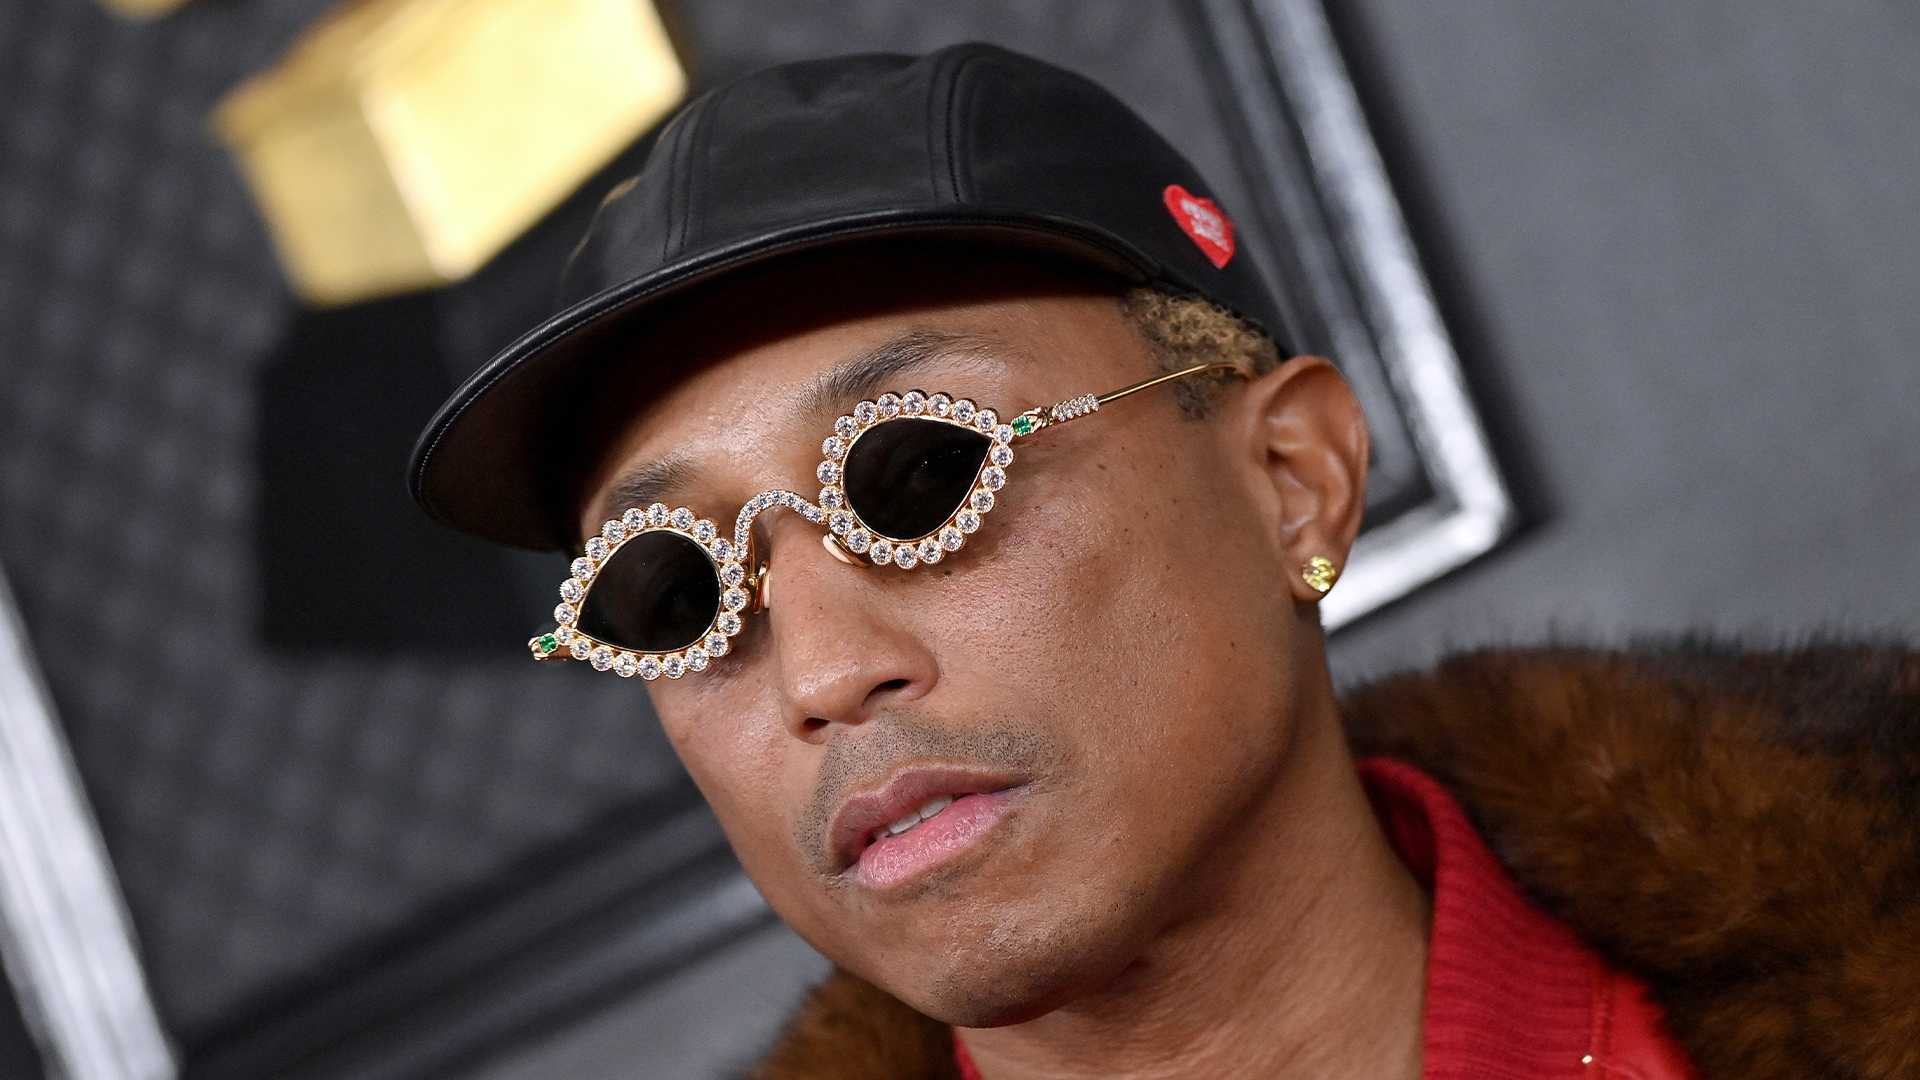 Pharrell Williams Becomes An Adviser At Human Made After Investing In The International Fashion Brand In 2010